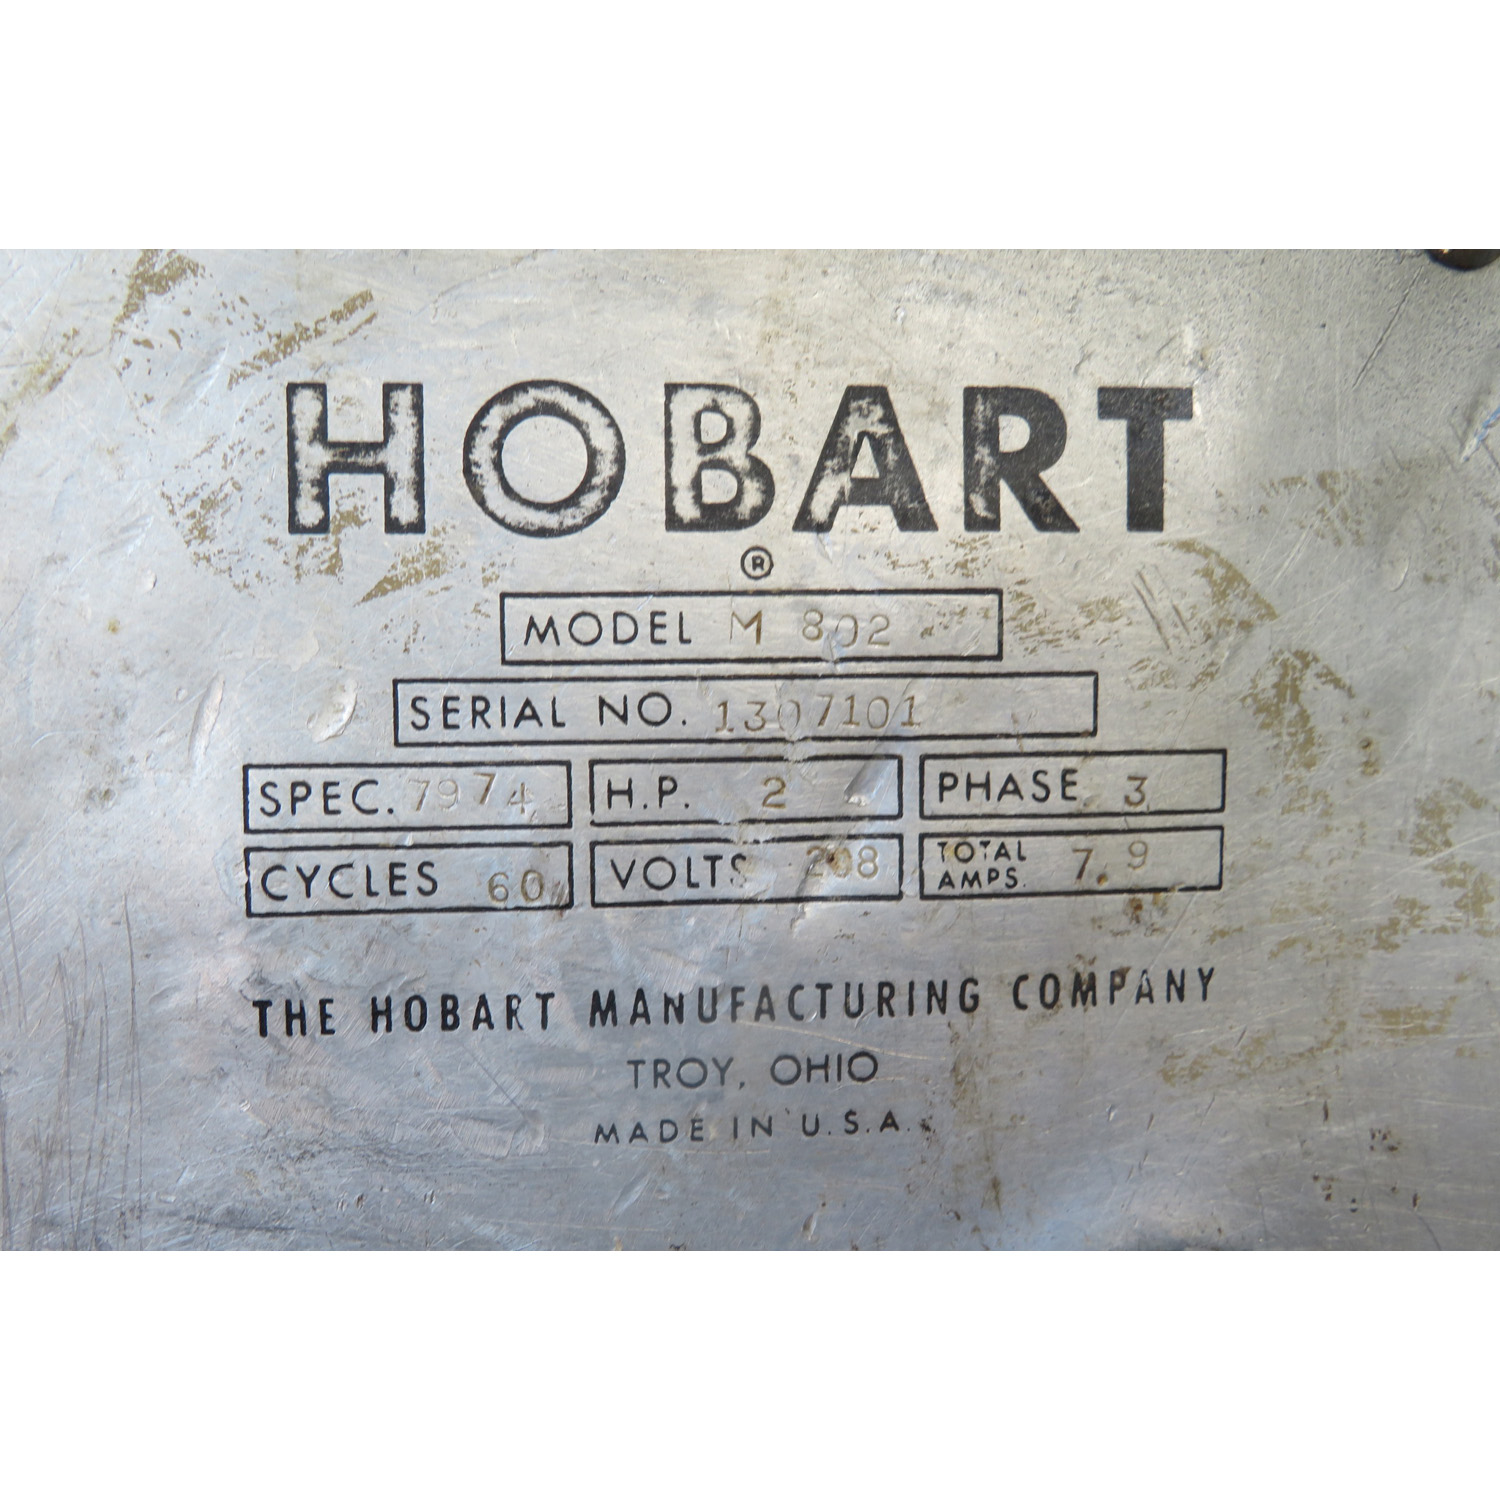 Hobart 80 Quart M802 Mixer, Used Great Condition image 3